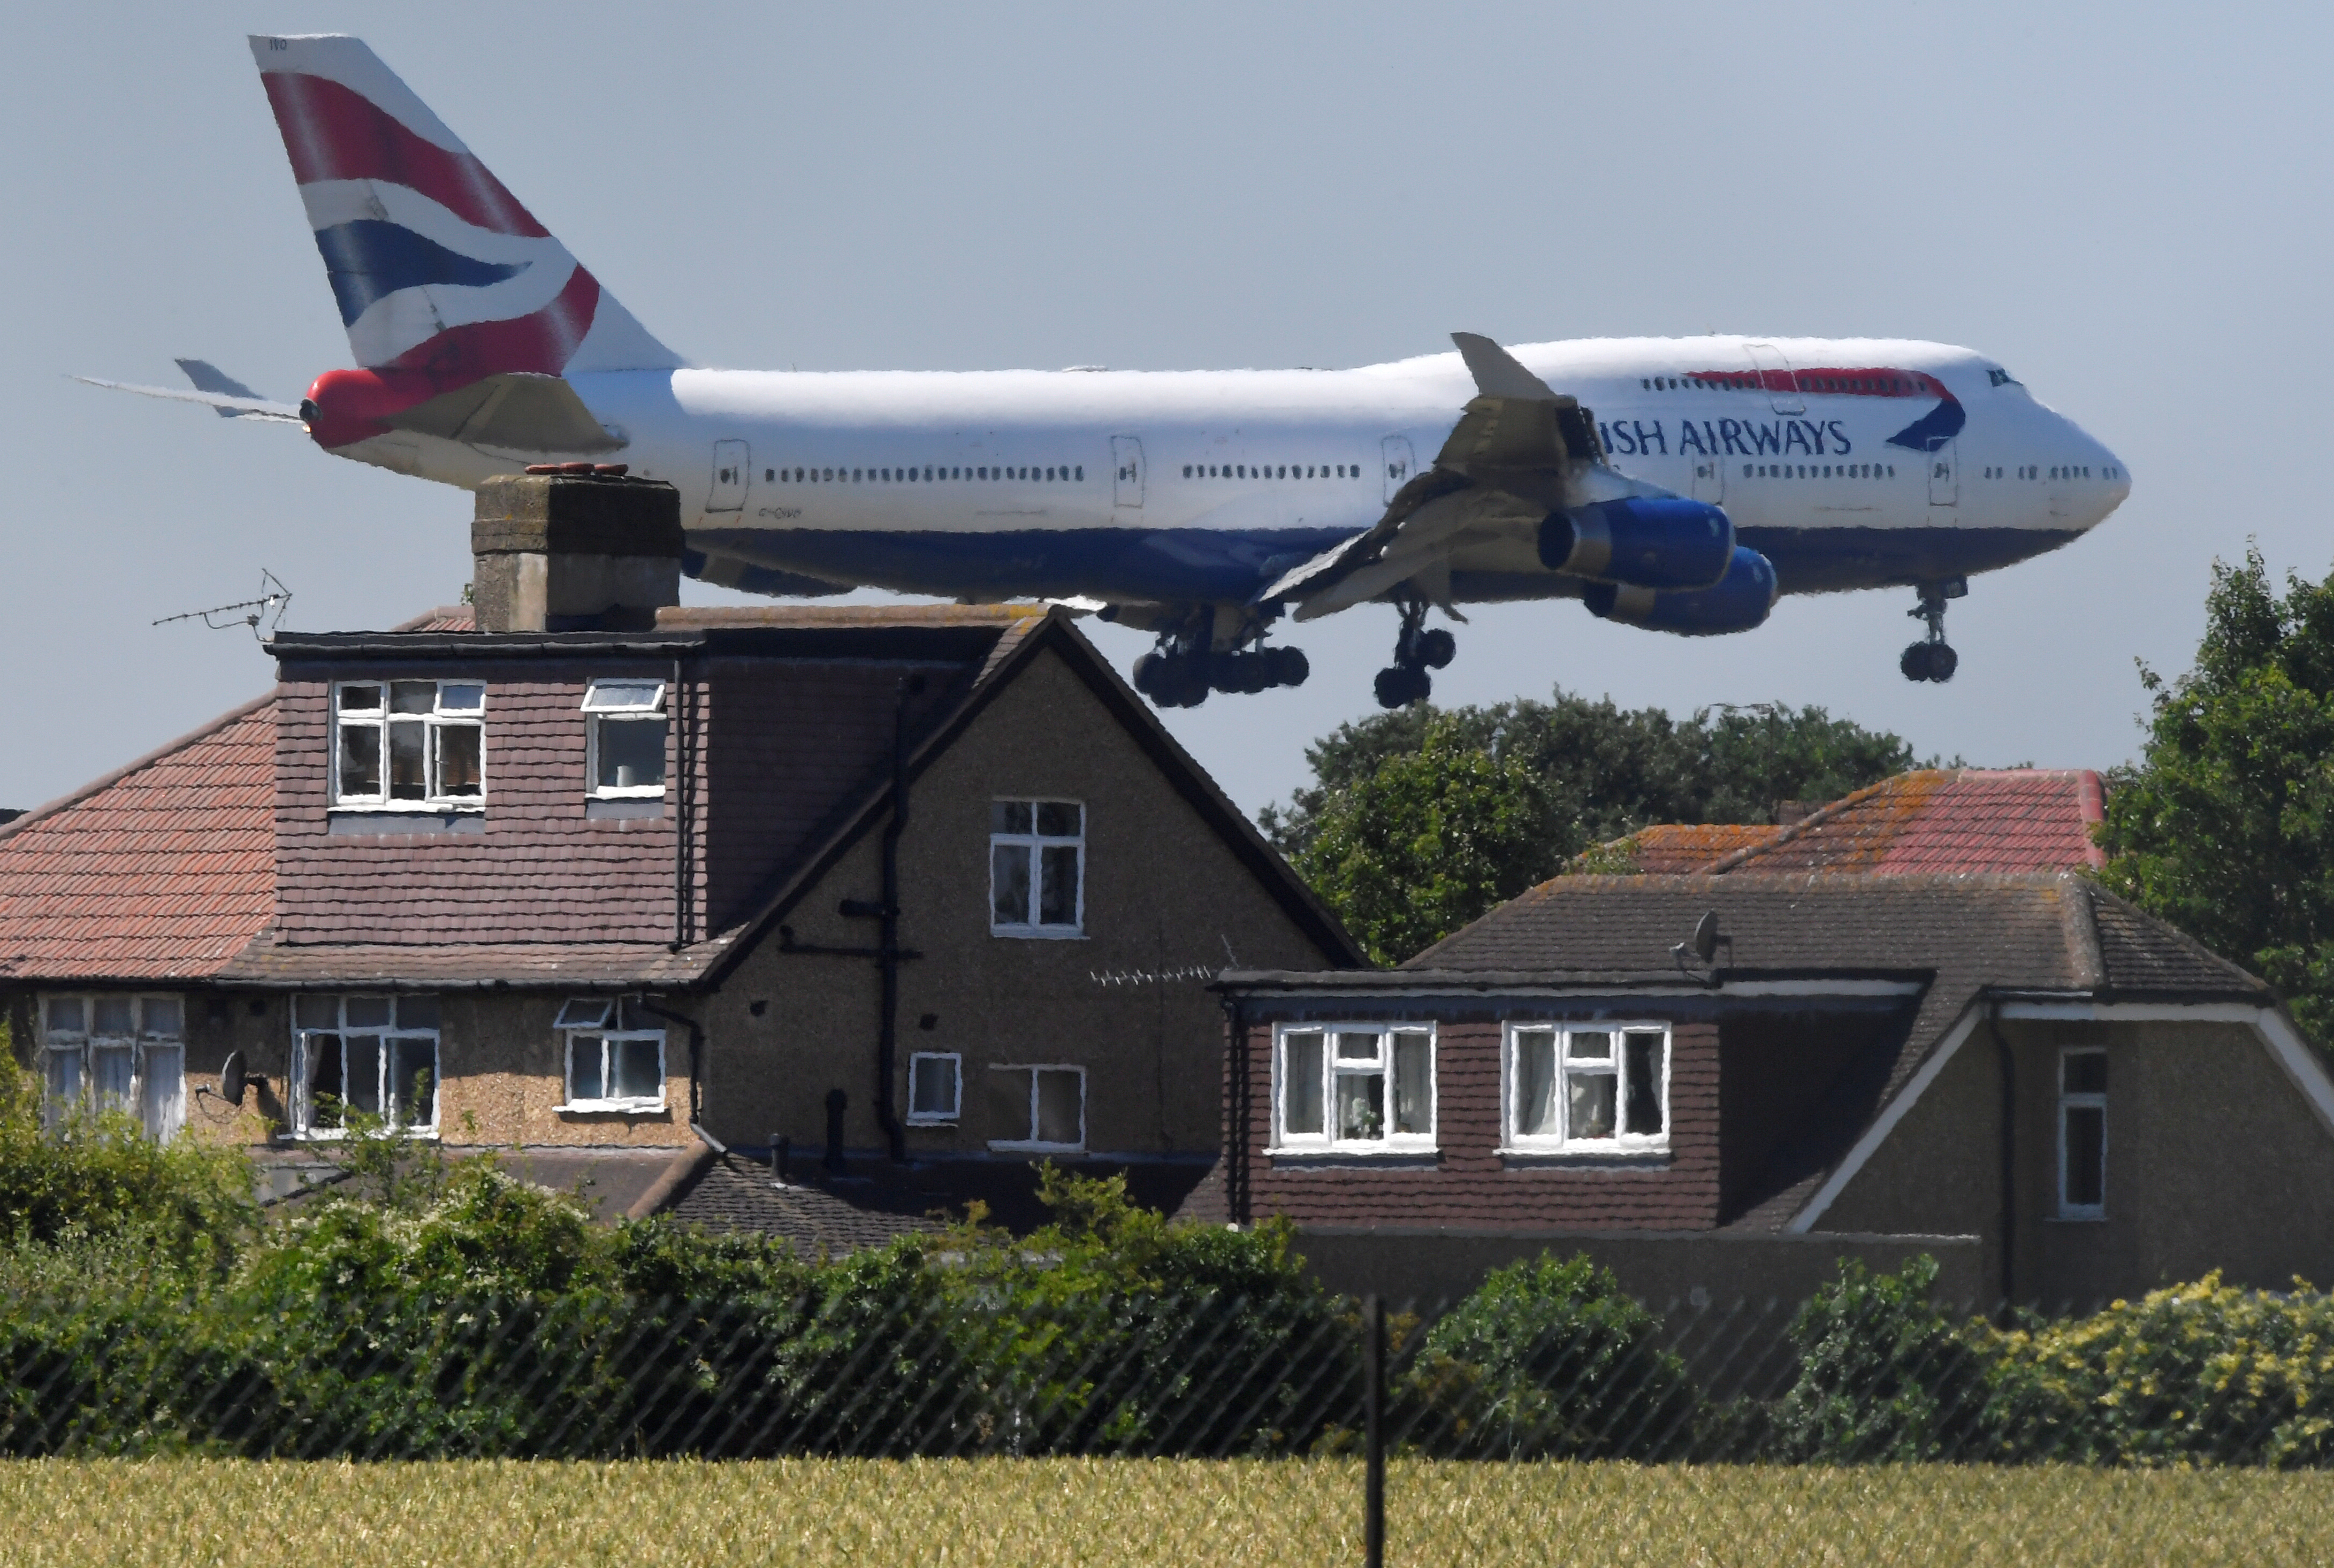 A British Airways Boeing 747 comes in to land at Heathrow airport in London